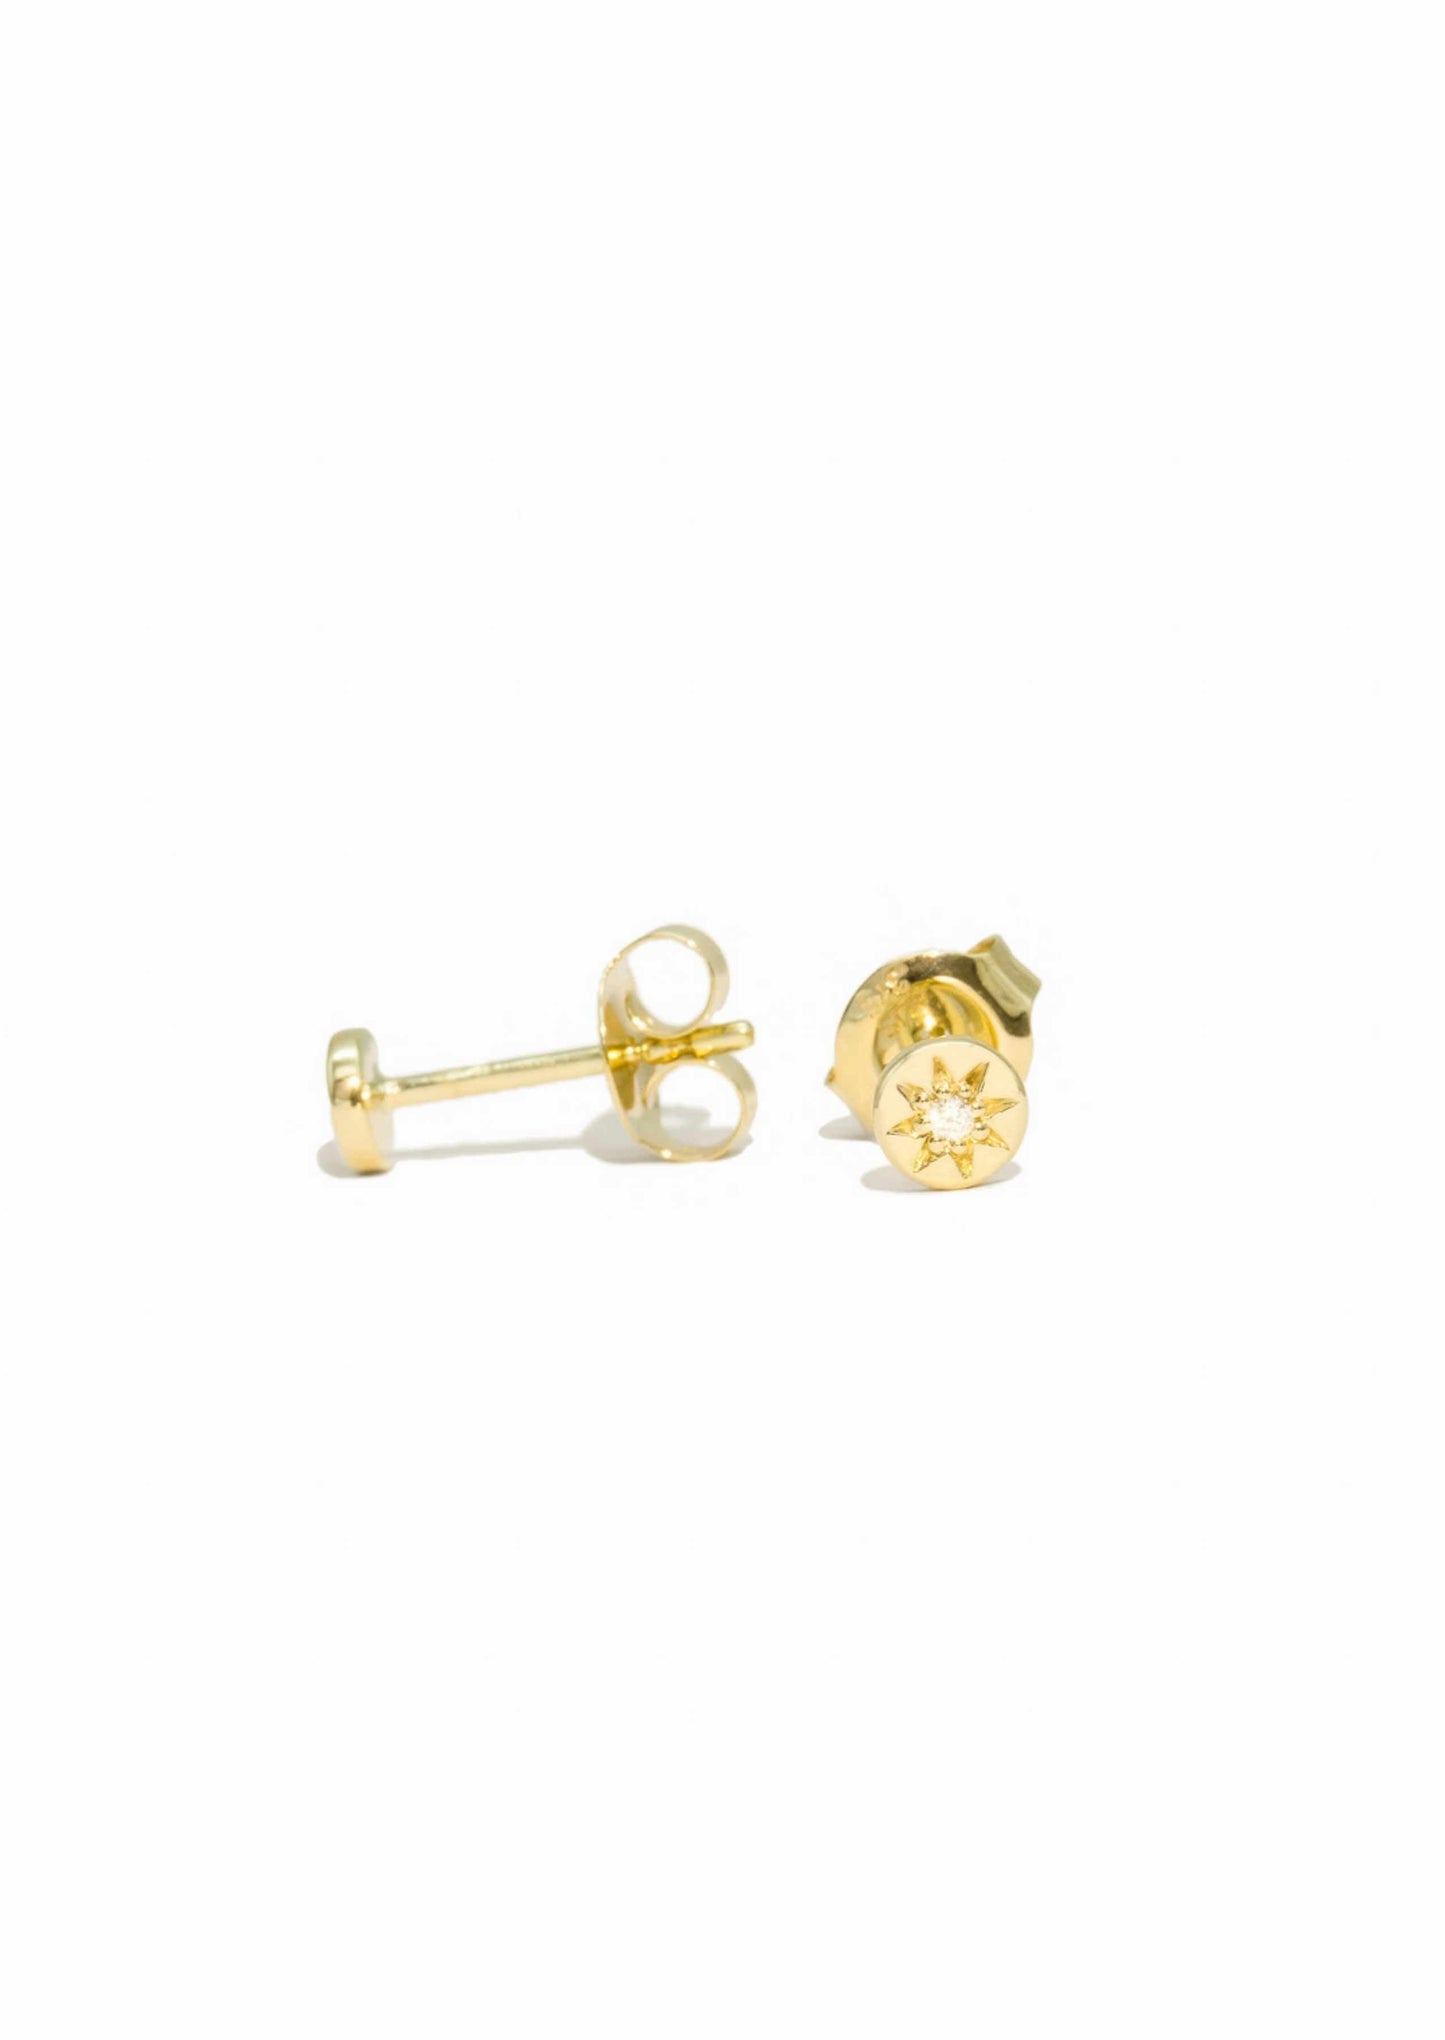 The Solid Gold Diamond Compass Stud Earrings